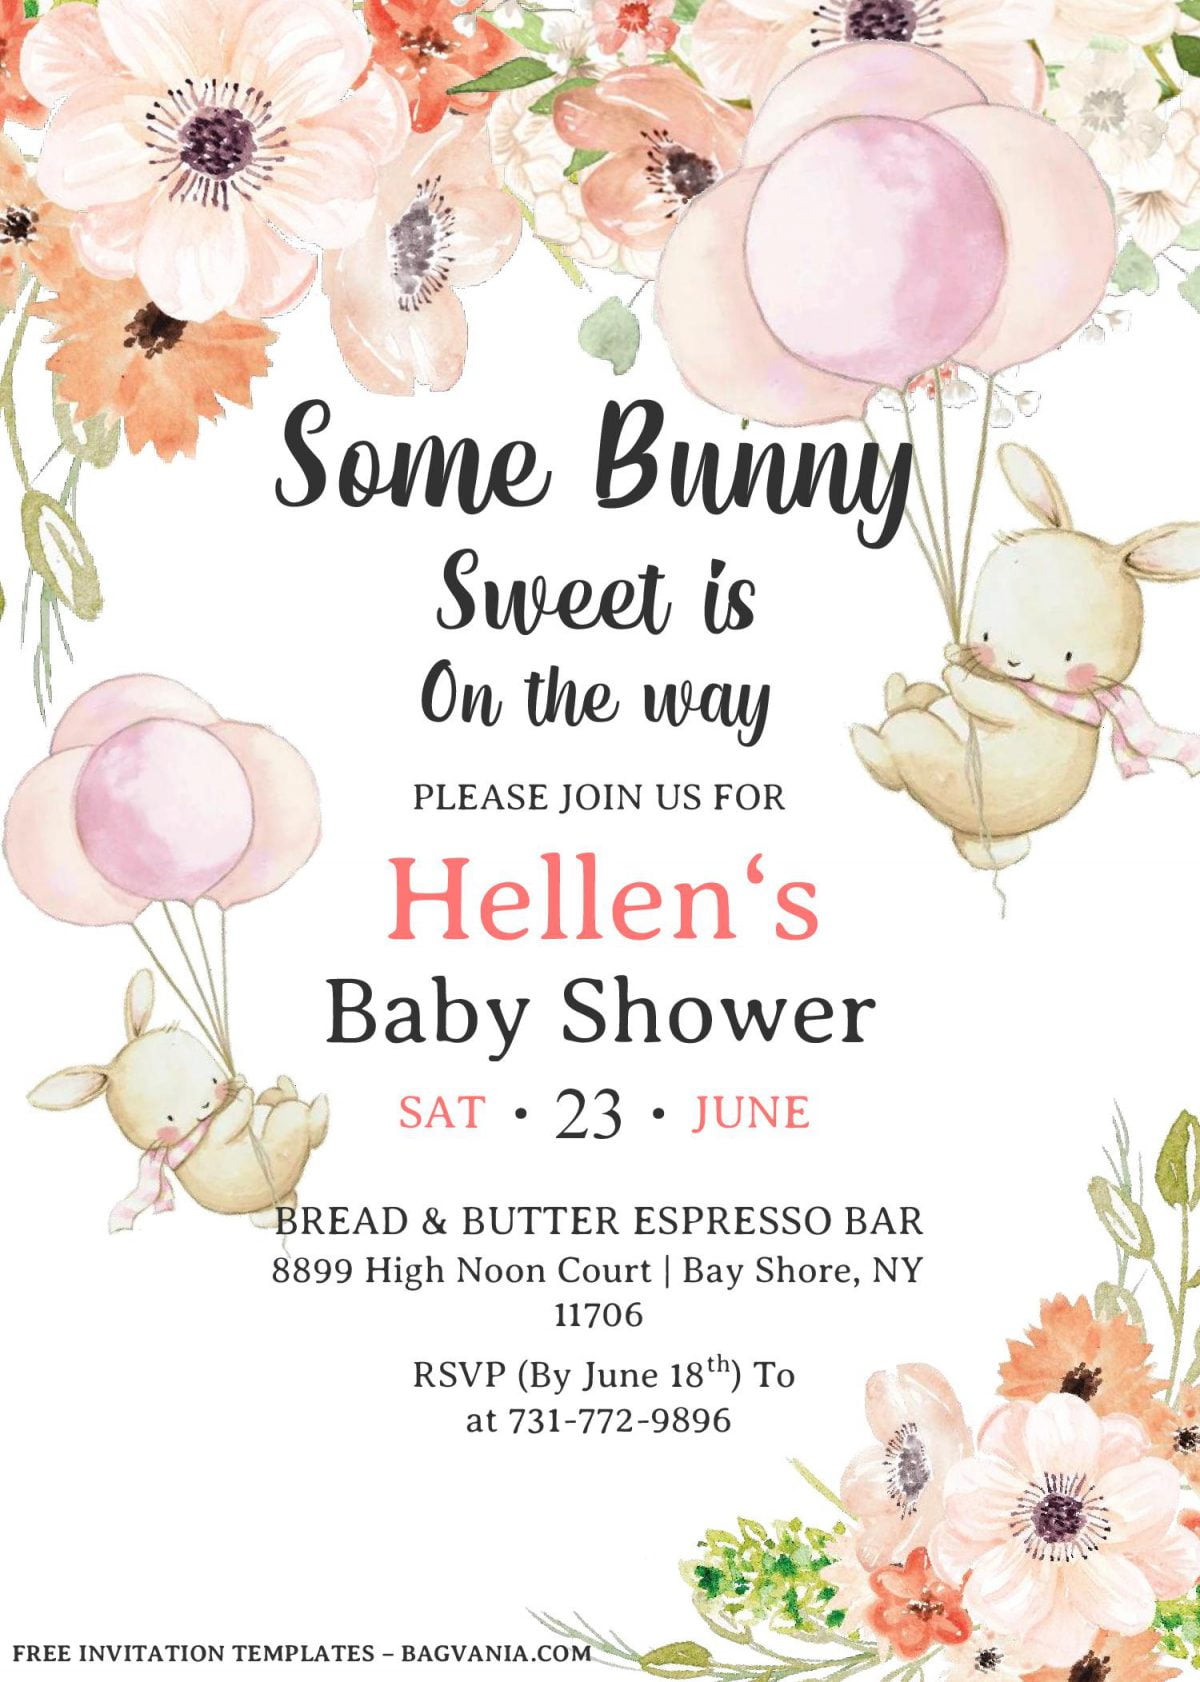 Some Bunny Invitation Templates - Editable With MS Word and has portrait orientation